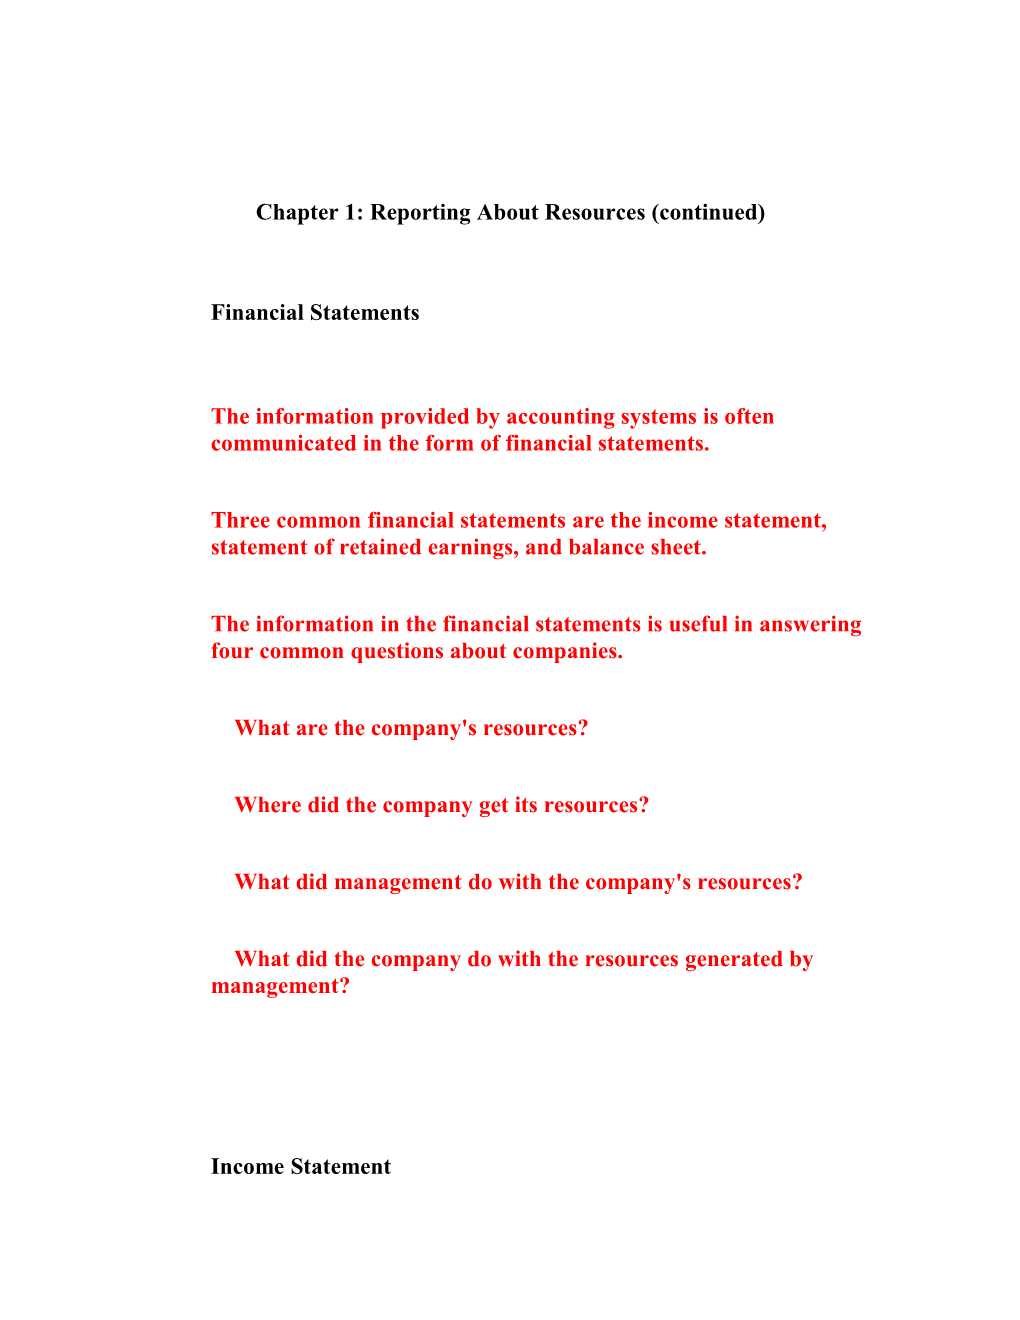 Chapter 1: Reporting About Resources (Continued)